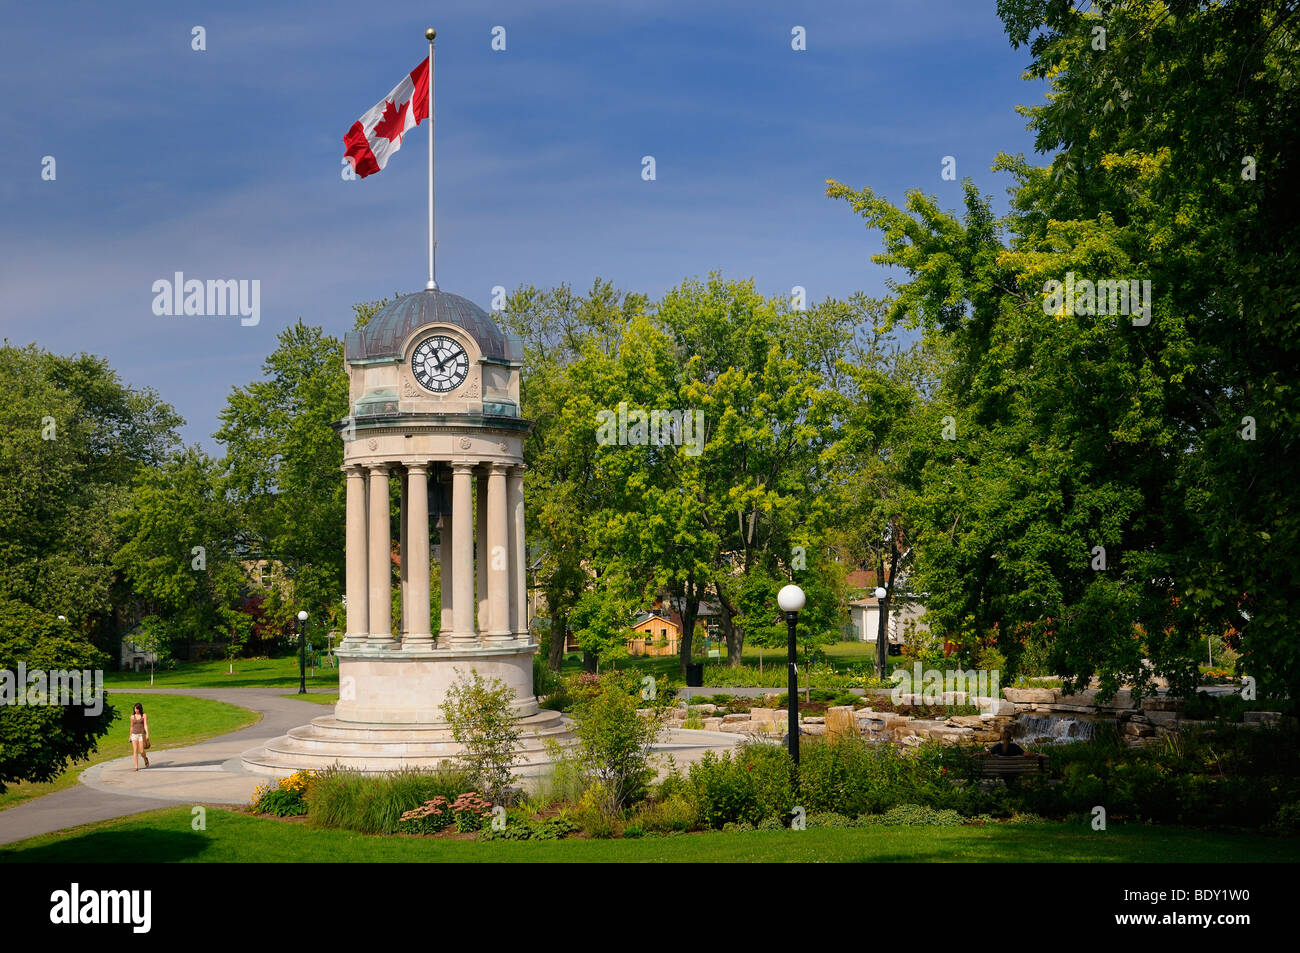 Old City Hall Clock Tower and fountain in Victoria Park Kitchener with Canadian flag Stock Photo